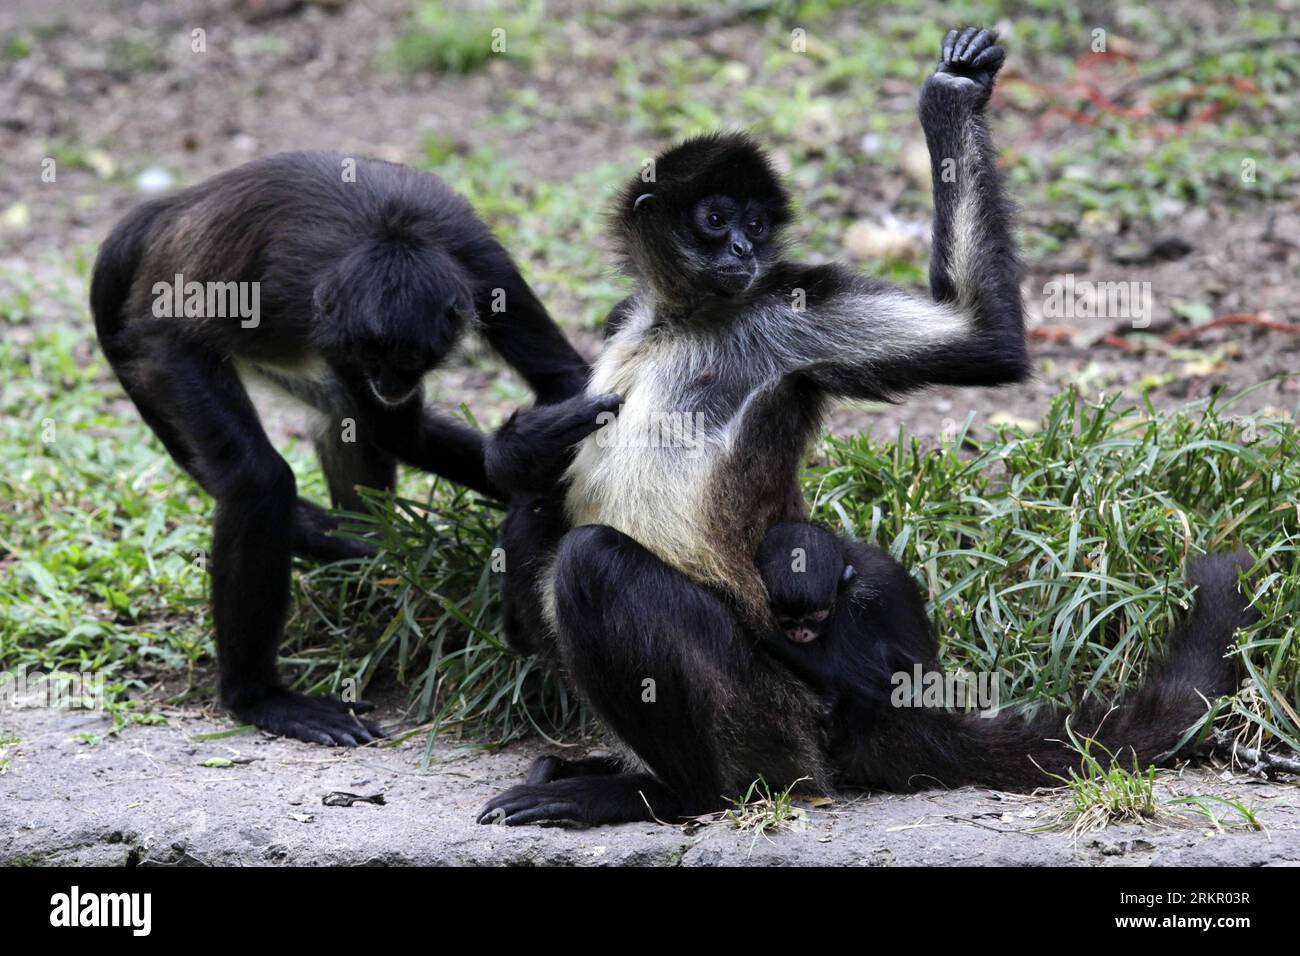 Bildnummer: 58080756  Datum: 05.06.2012  Copyright: imago/Xinhua (120608) -- SAN SALVADOR, June 8, 2012 (Xinhua) -- Spider Monkeys (Ateles Geoffroyi), endangered, remain in captivity at a zoo in San Salvador, capital of El Salvador, June 5, 2012. The National Zoo received 40,000 visits per year and kept in captivity 117 animal species, mainly in danger of extinction in the country. (Xinhua/Oscar Rivera) (ctt) EL SALVADOR-SAN SALVADOR-ZOO PUBLICATIONxNOTxINxCHN Gesellschaft Tiere xns x2x 2012 quer  o0 Geoffroy-Klammeraffe Affe Fellpflege     58080756 Date 05 06 2012 Copyright Imago XINHUA  San Stock Photo